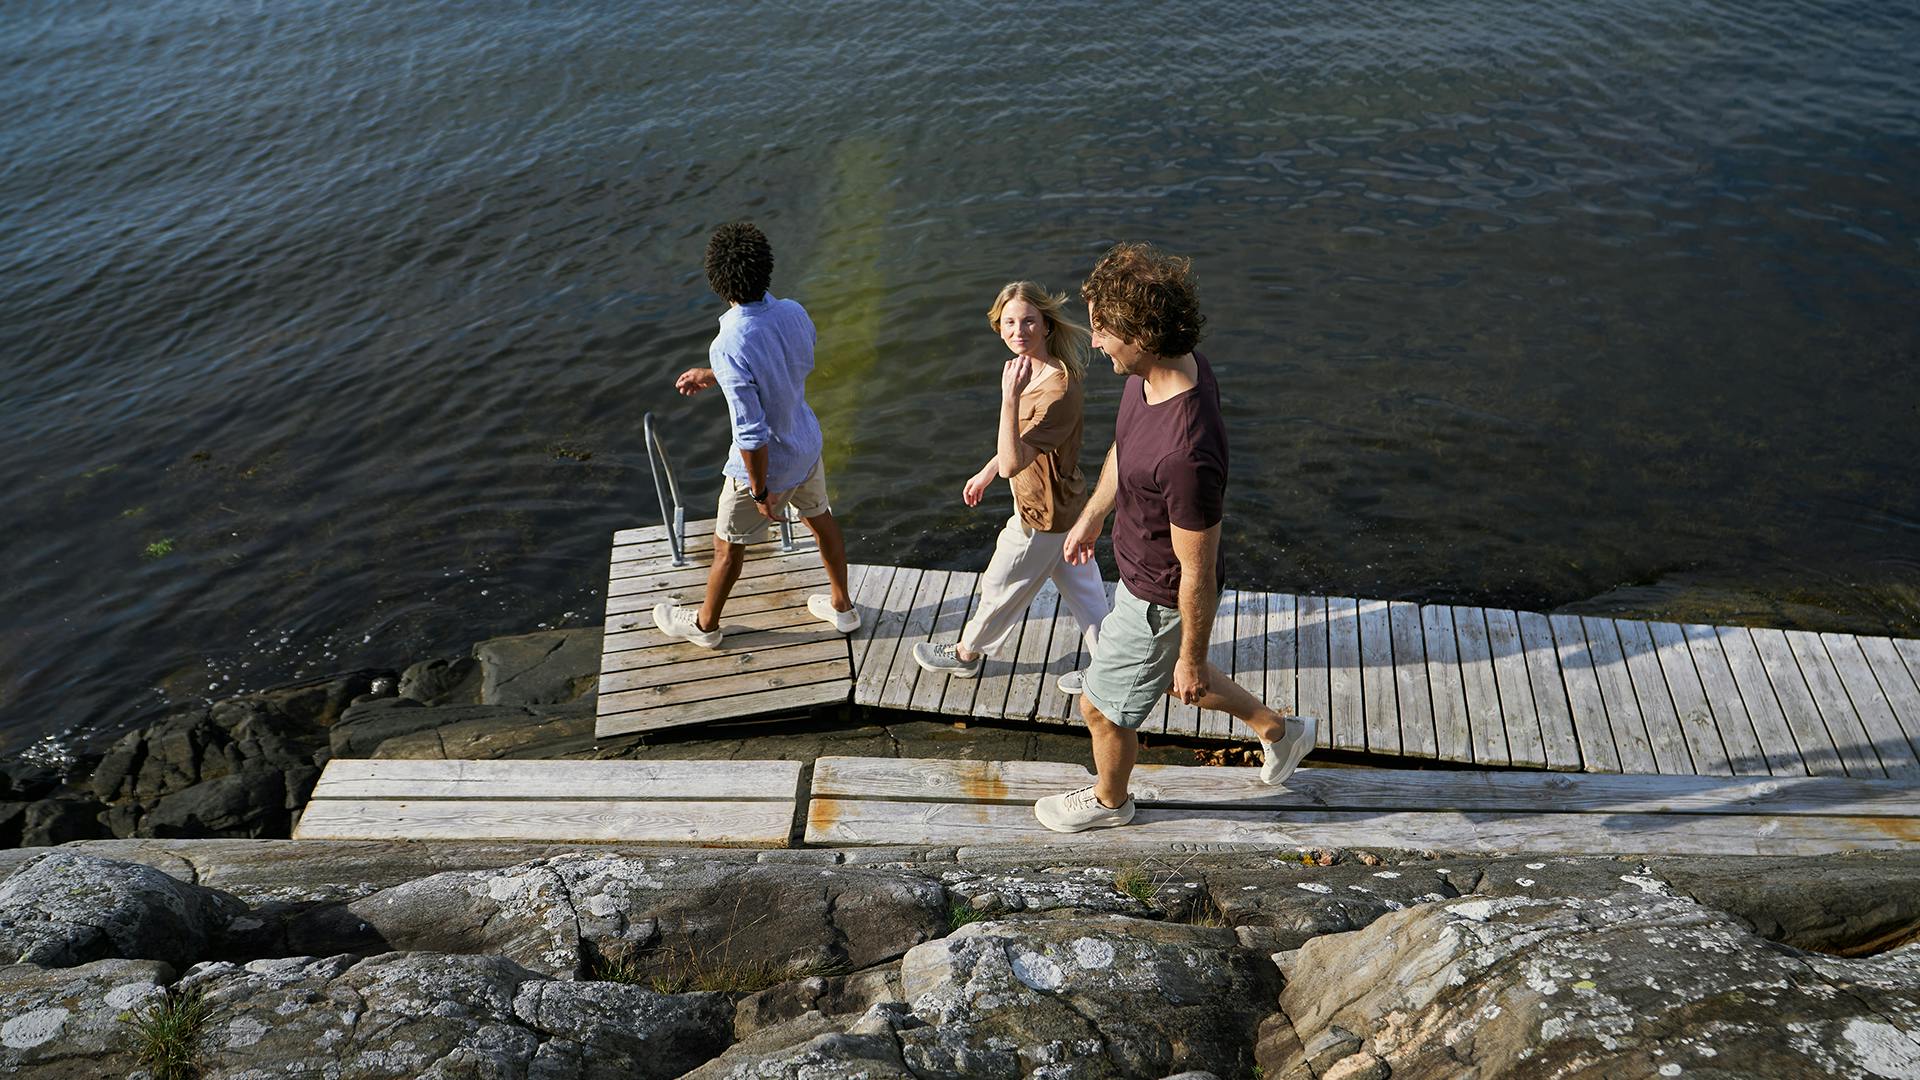 Three friends strolling on a dock by the water, enjoying a leisurely walk together.